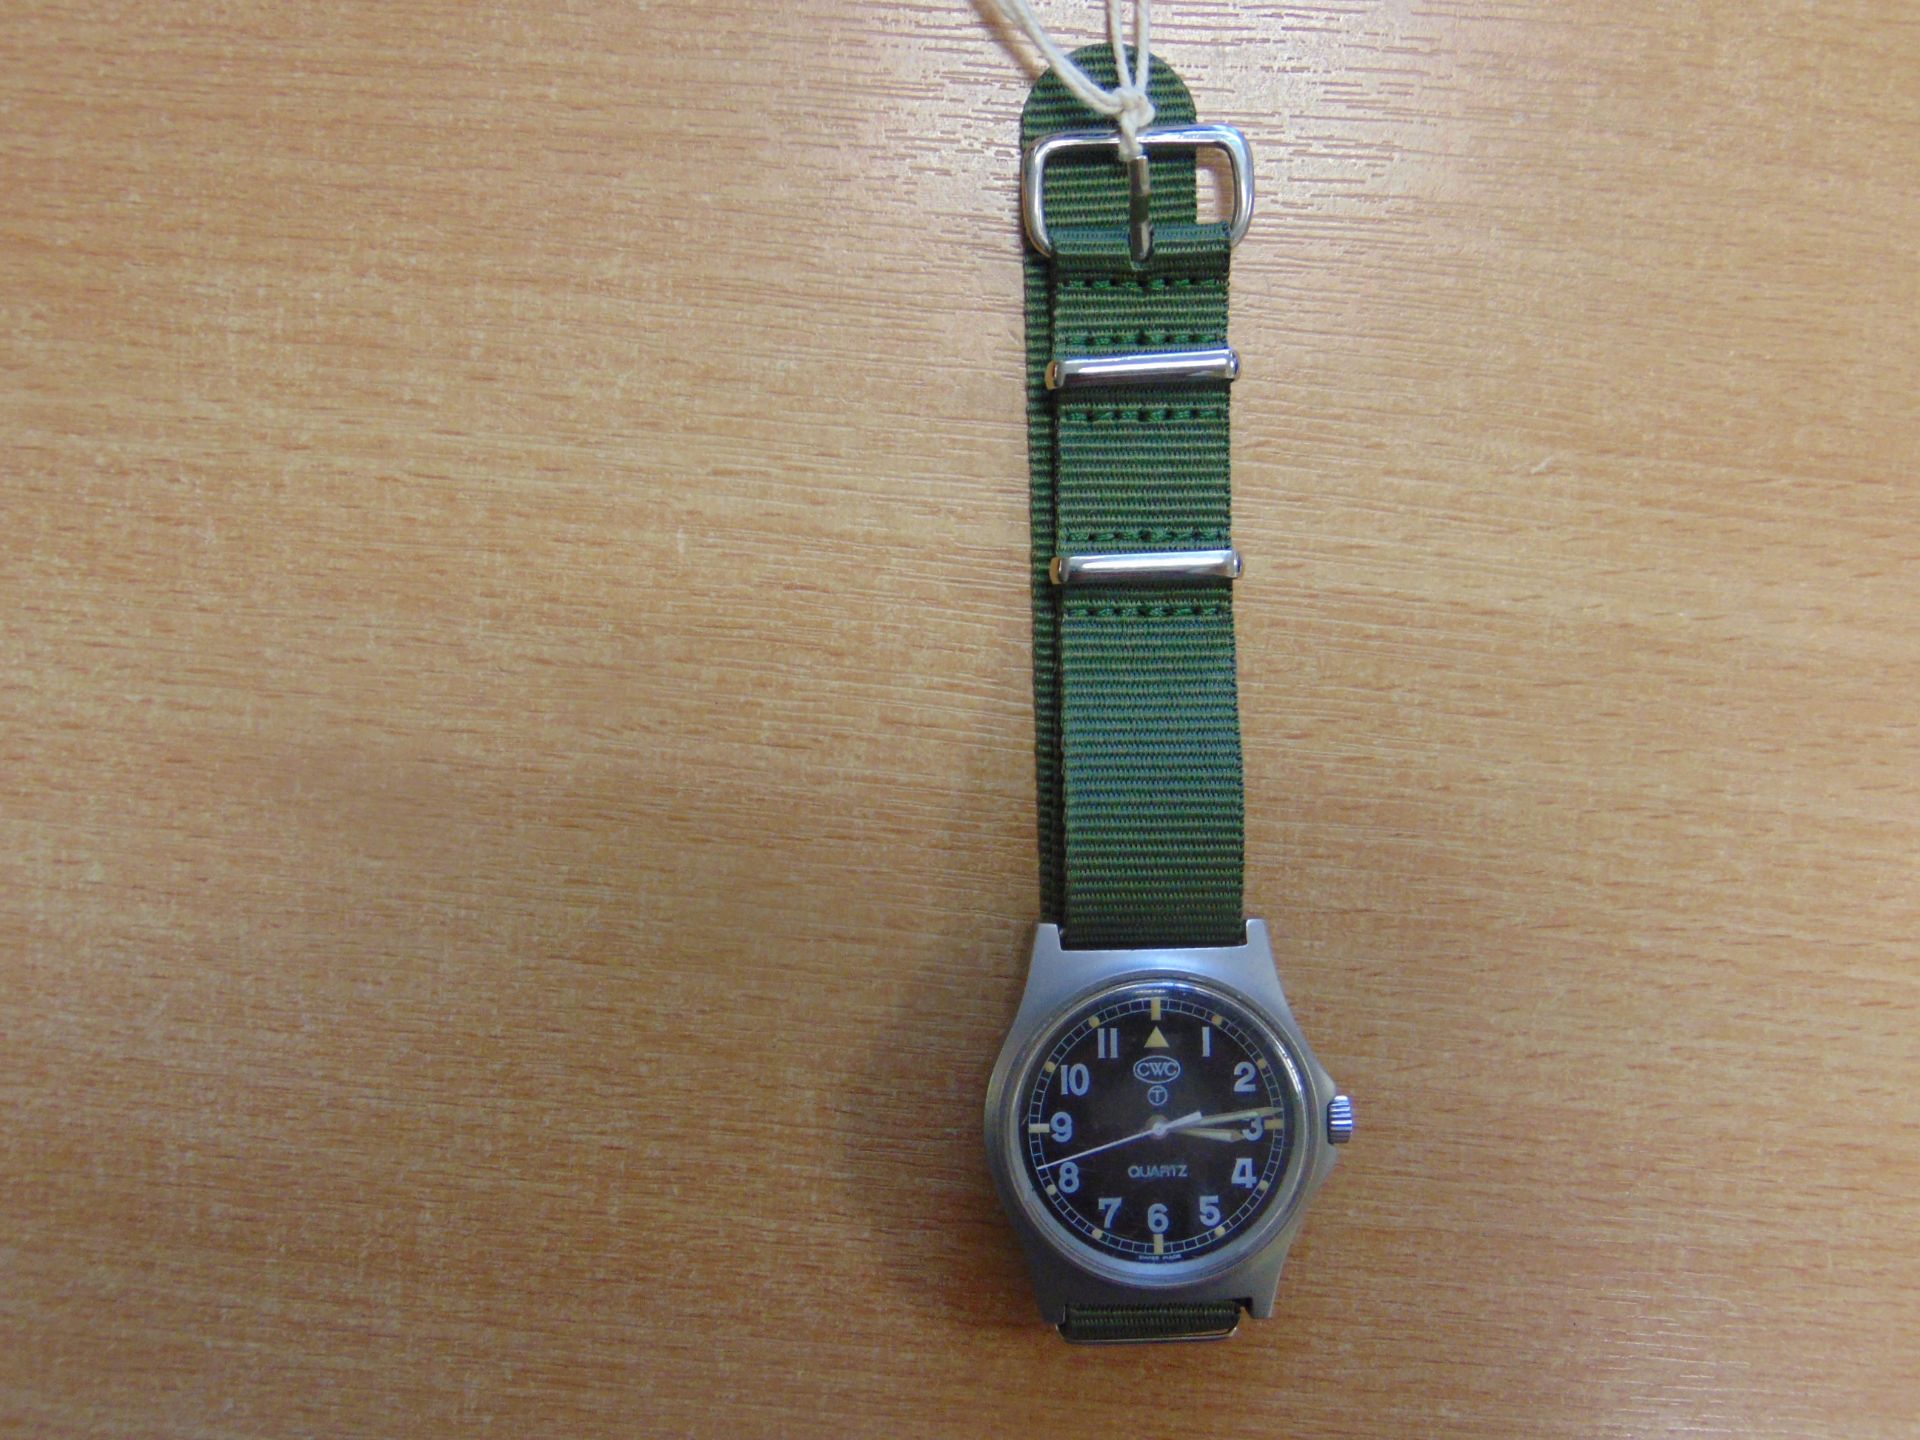 V. RARE C.W.C.0555 RM/NAVY ISSUE SERVICE WATCH DATED 1995 - Image 4 of 7